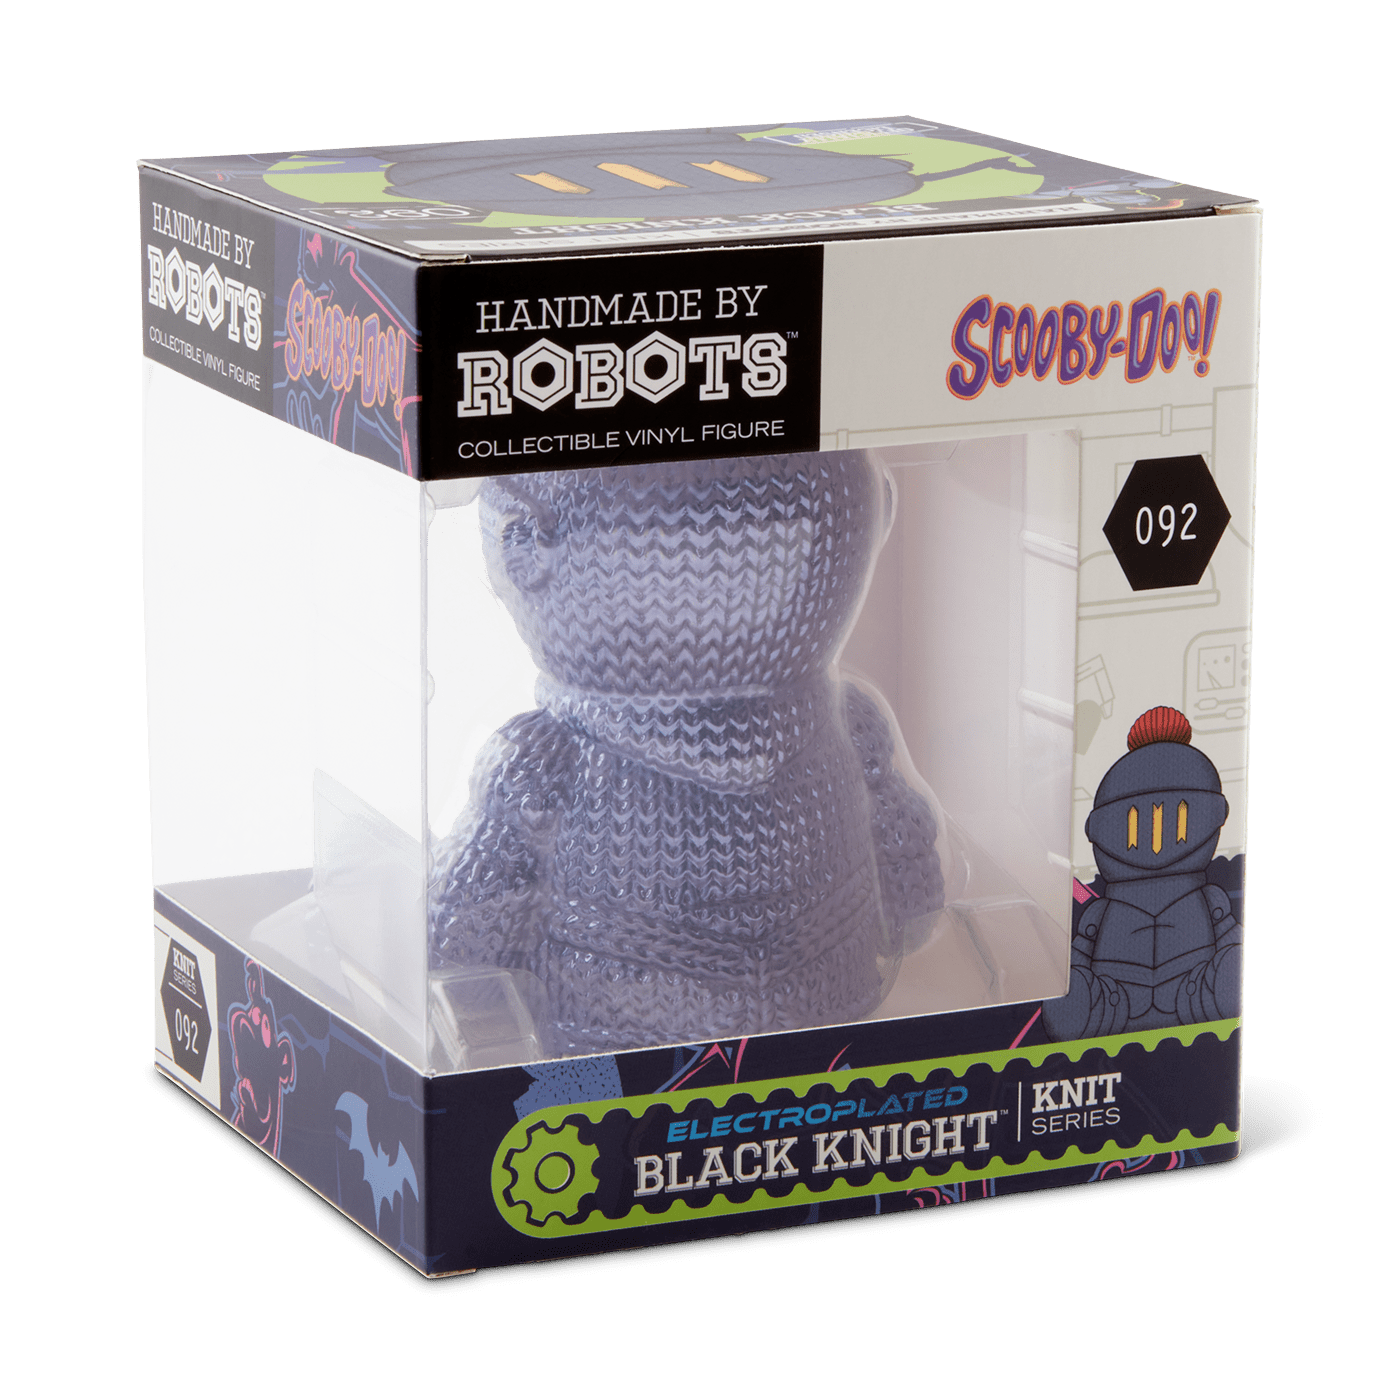 Black Knight #092 - Scooby-Doo - Handmade by Robots - Limited Edition